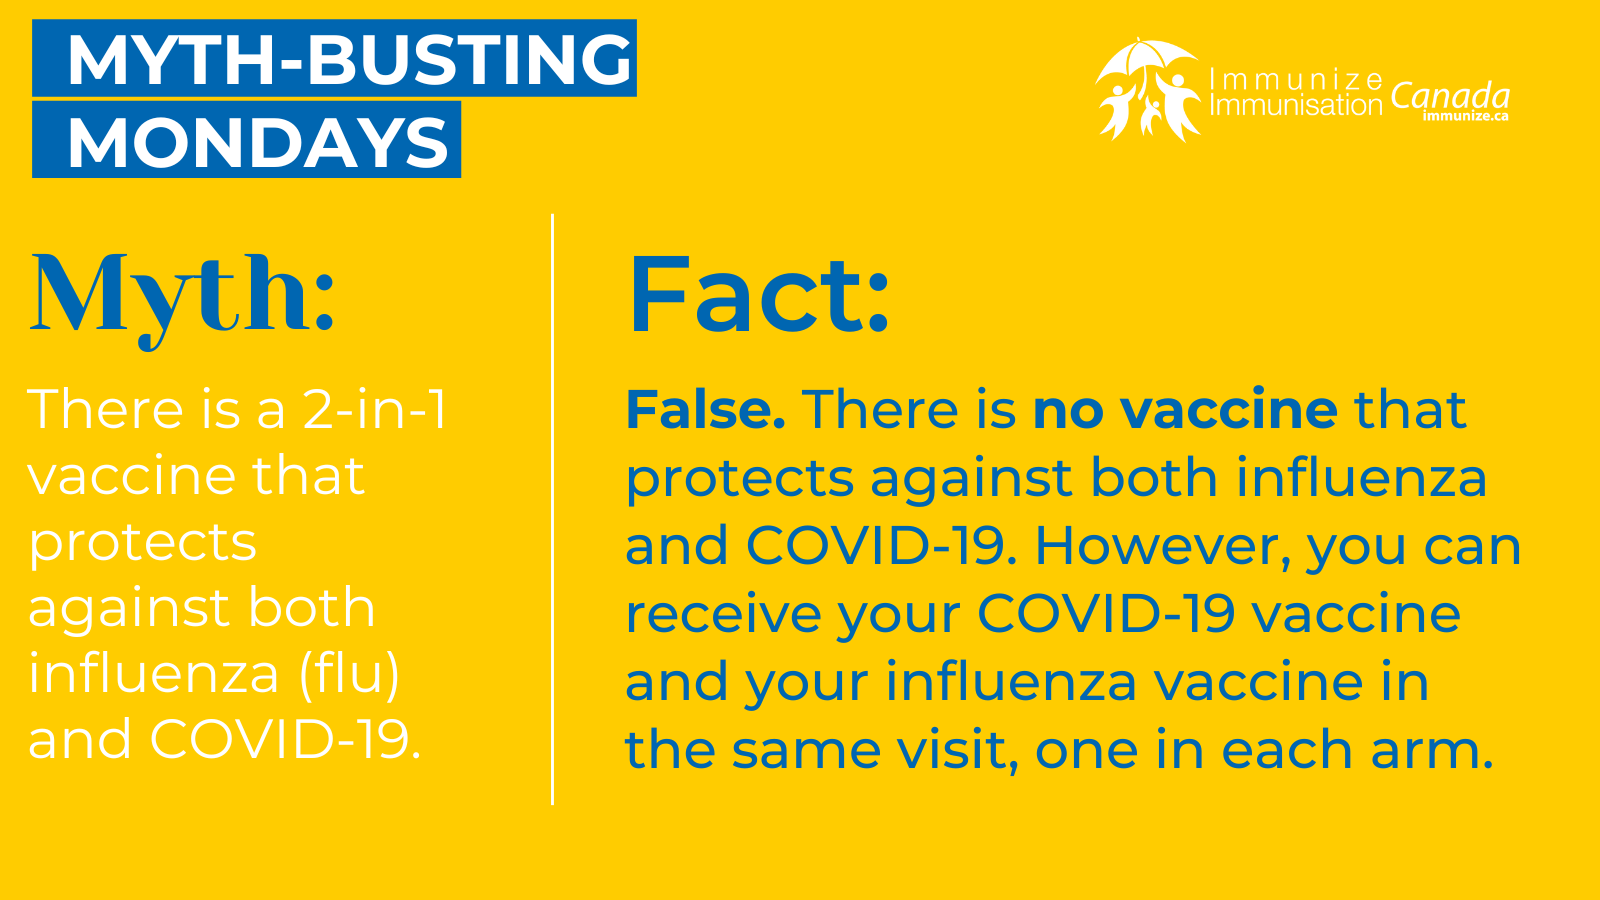 Myth-busting Monday - influenza and COVID-19 - image for Twitter 2